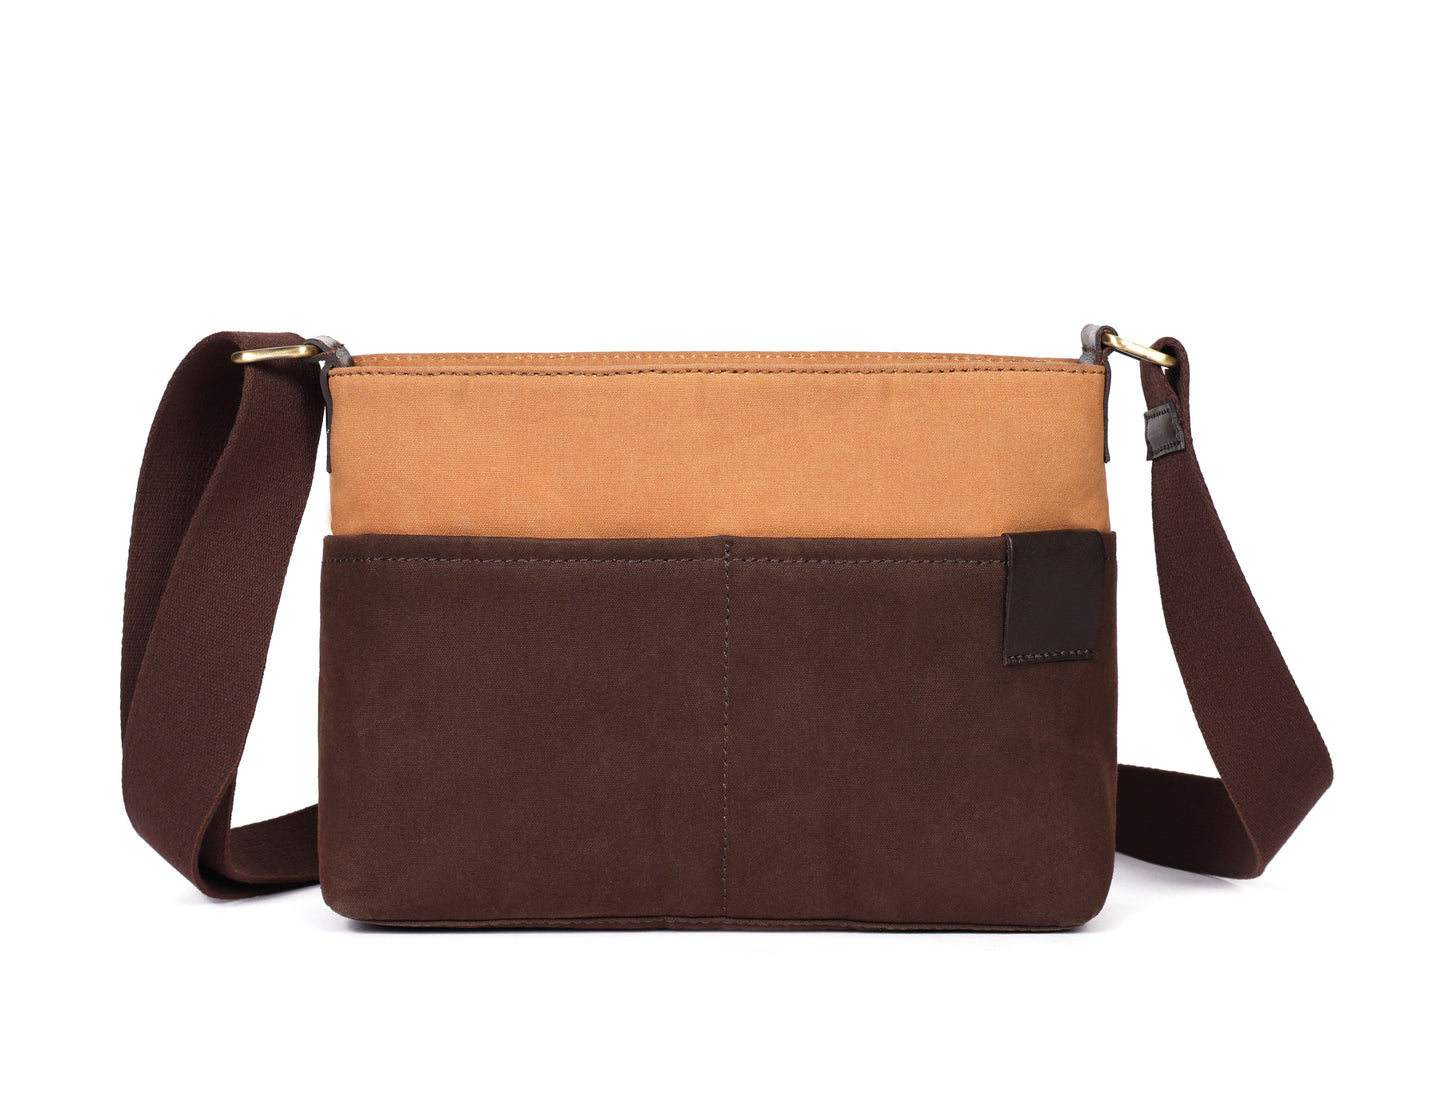 Brown and Tan Canvas Sling Bag - A Stylish and Functional Companion - CELTICINDIA